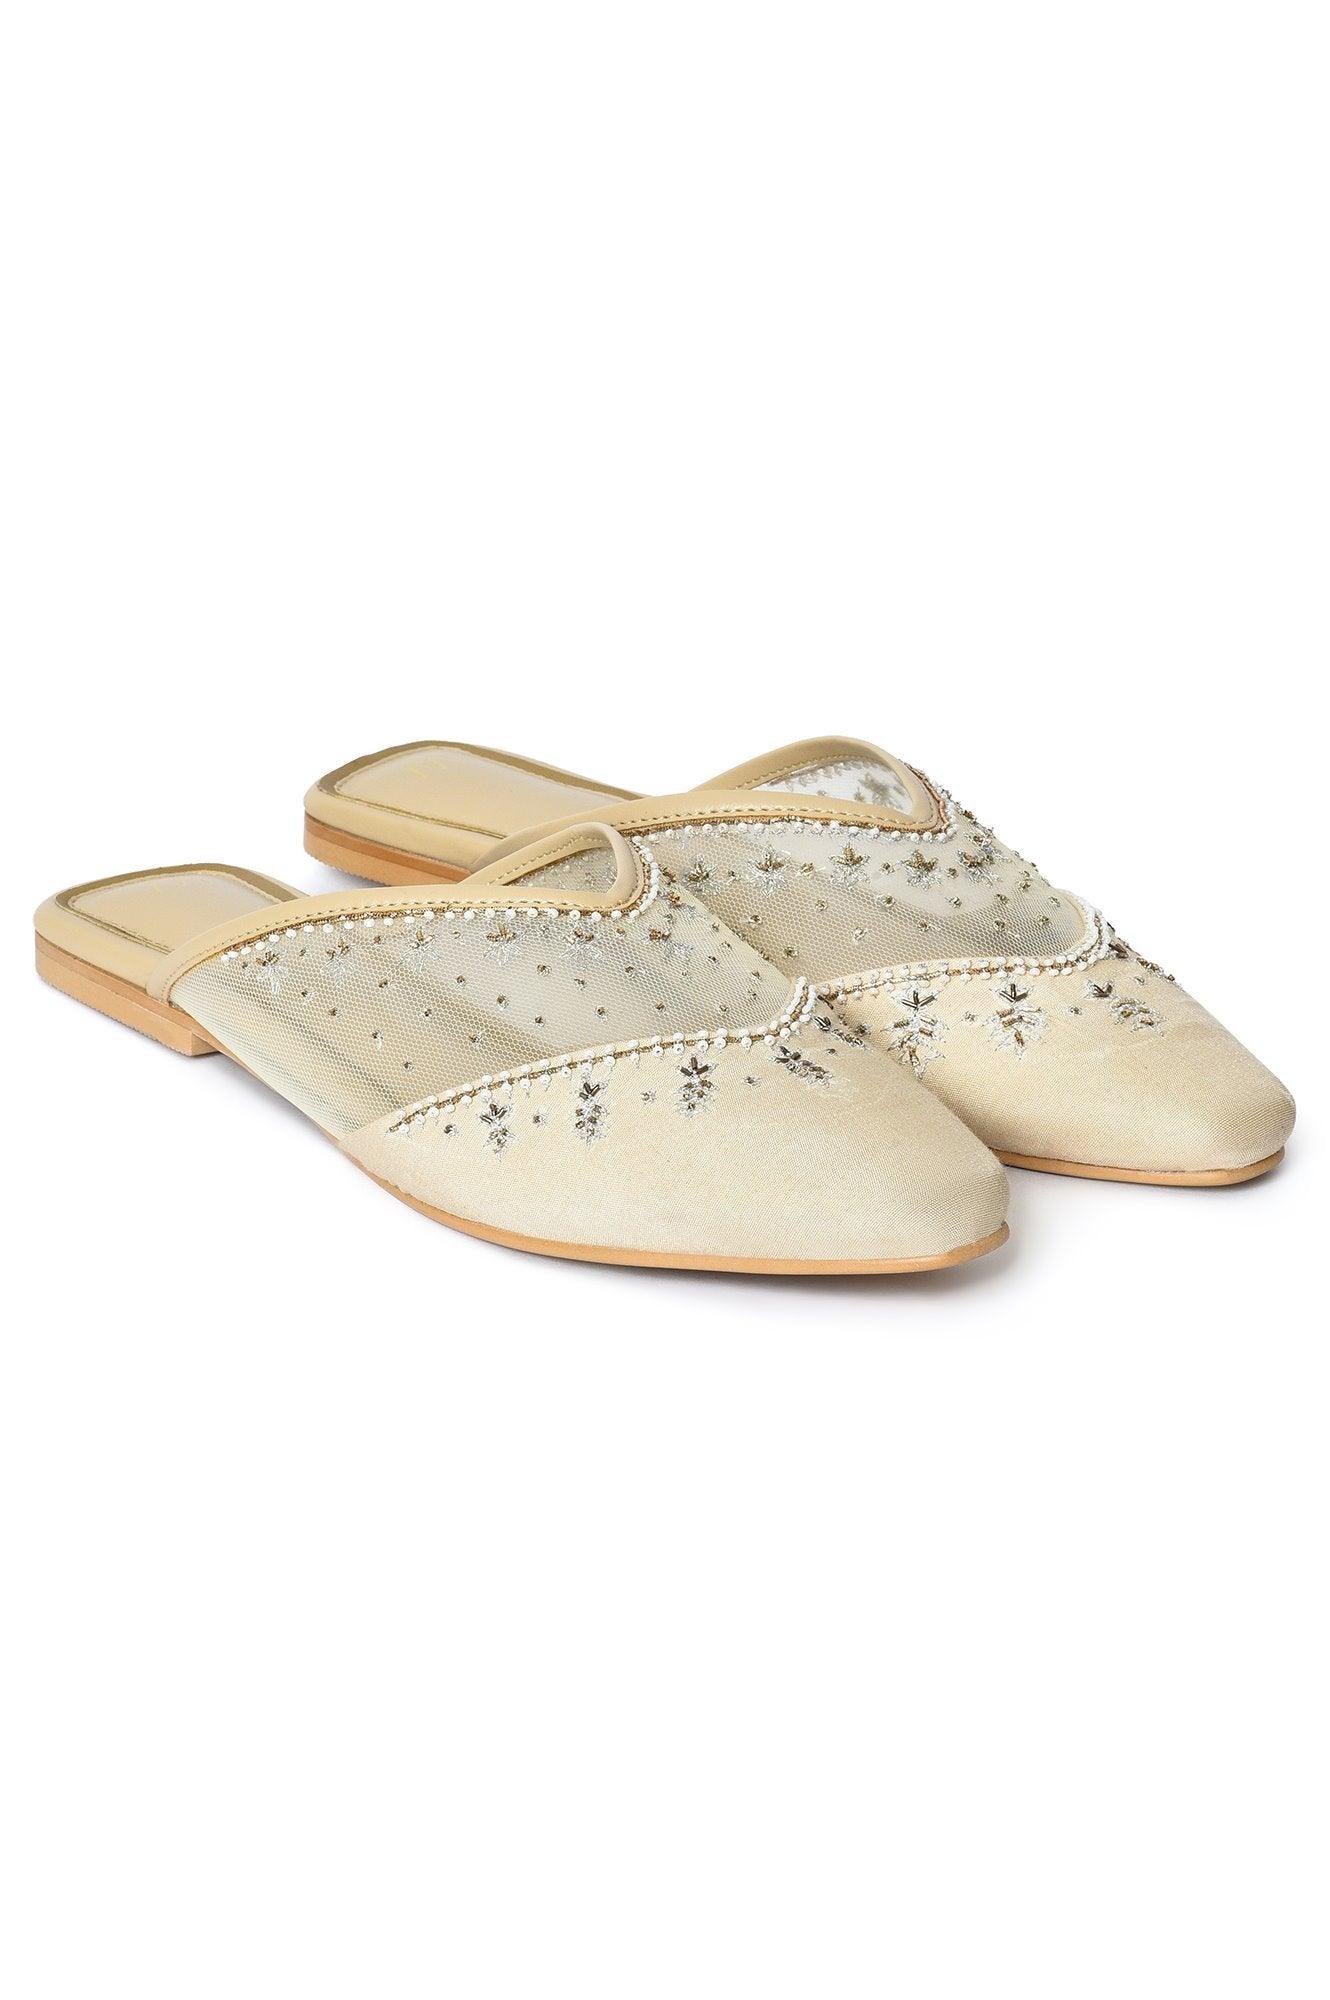 W Embroidered Beige Square Toe Flat - wforwoman